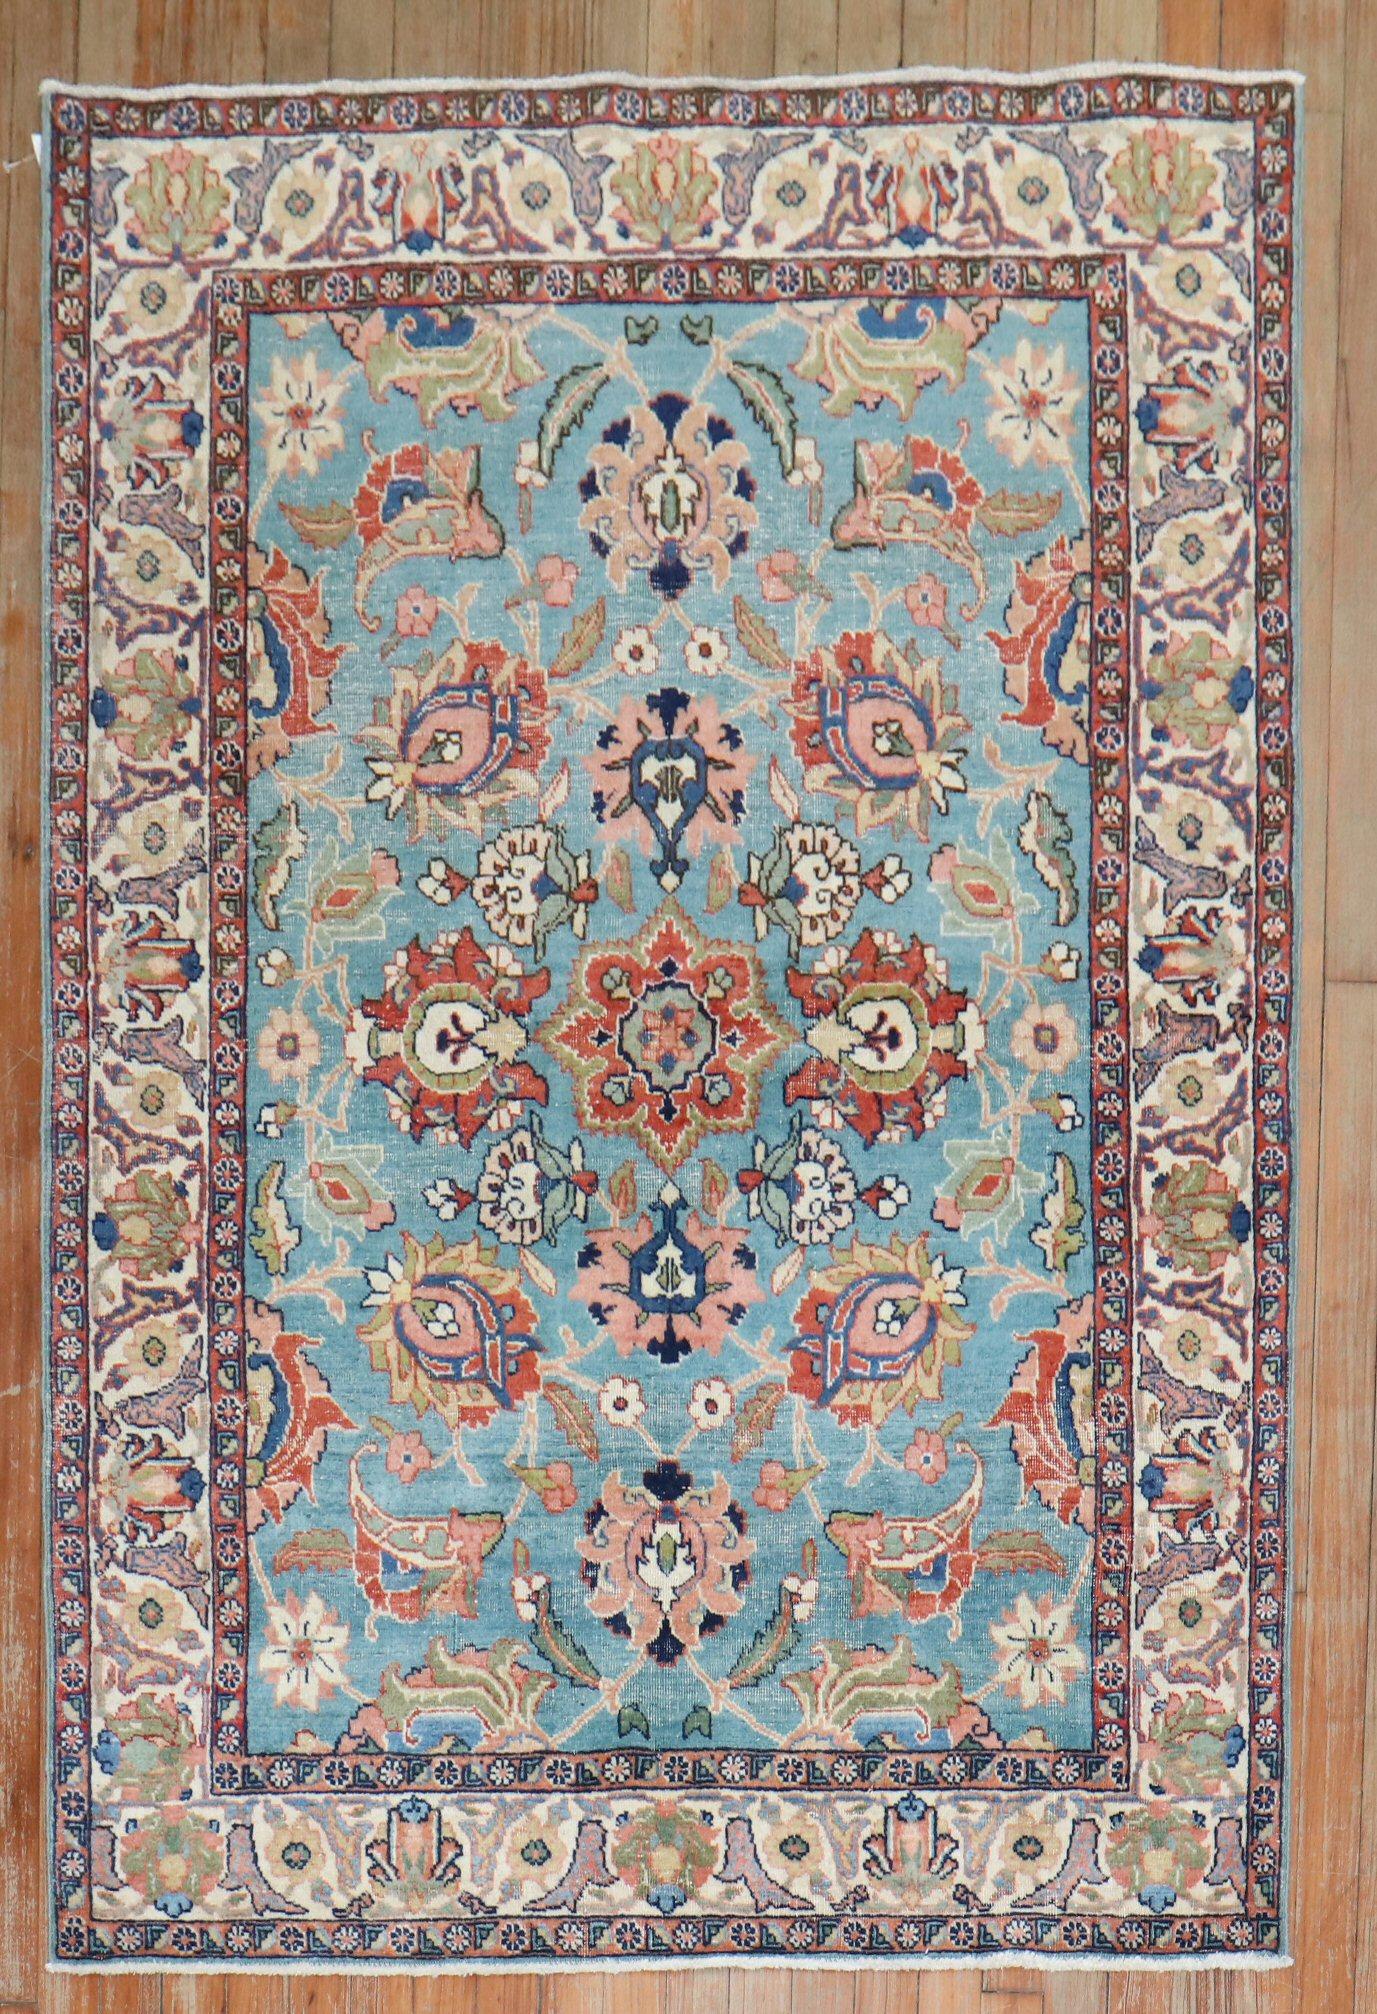 A set of Persian Tabriz scatter-size rugs from the early 20th Century. One is more faded and lighter than the other. 

Measure: 3'9'' x 5'5'' and 3'9'' x 5'4'' respectively.

